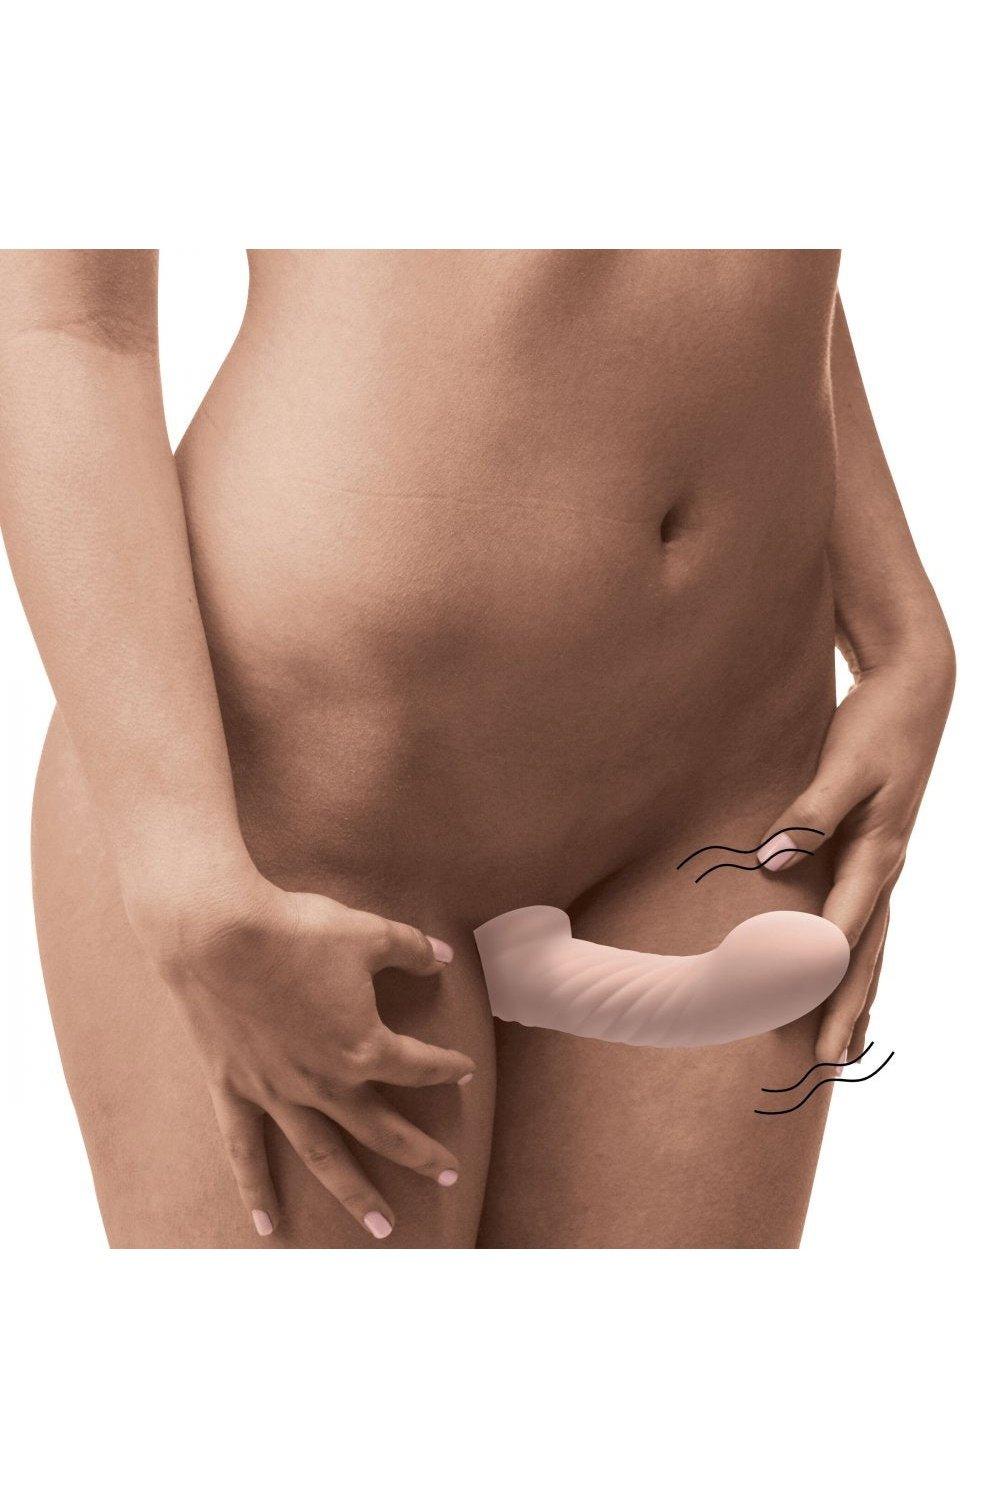 Ergo-Fit Twist Inflatable Vibrating Silicone Strapless Strap-on - Beige - Sex On the Go